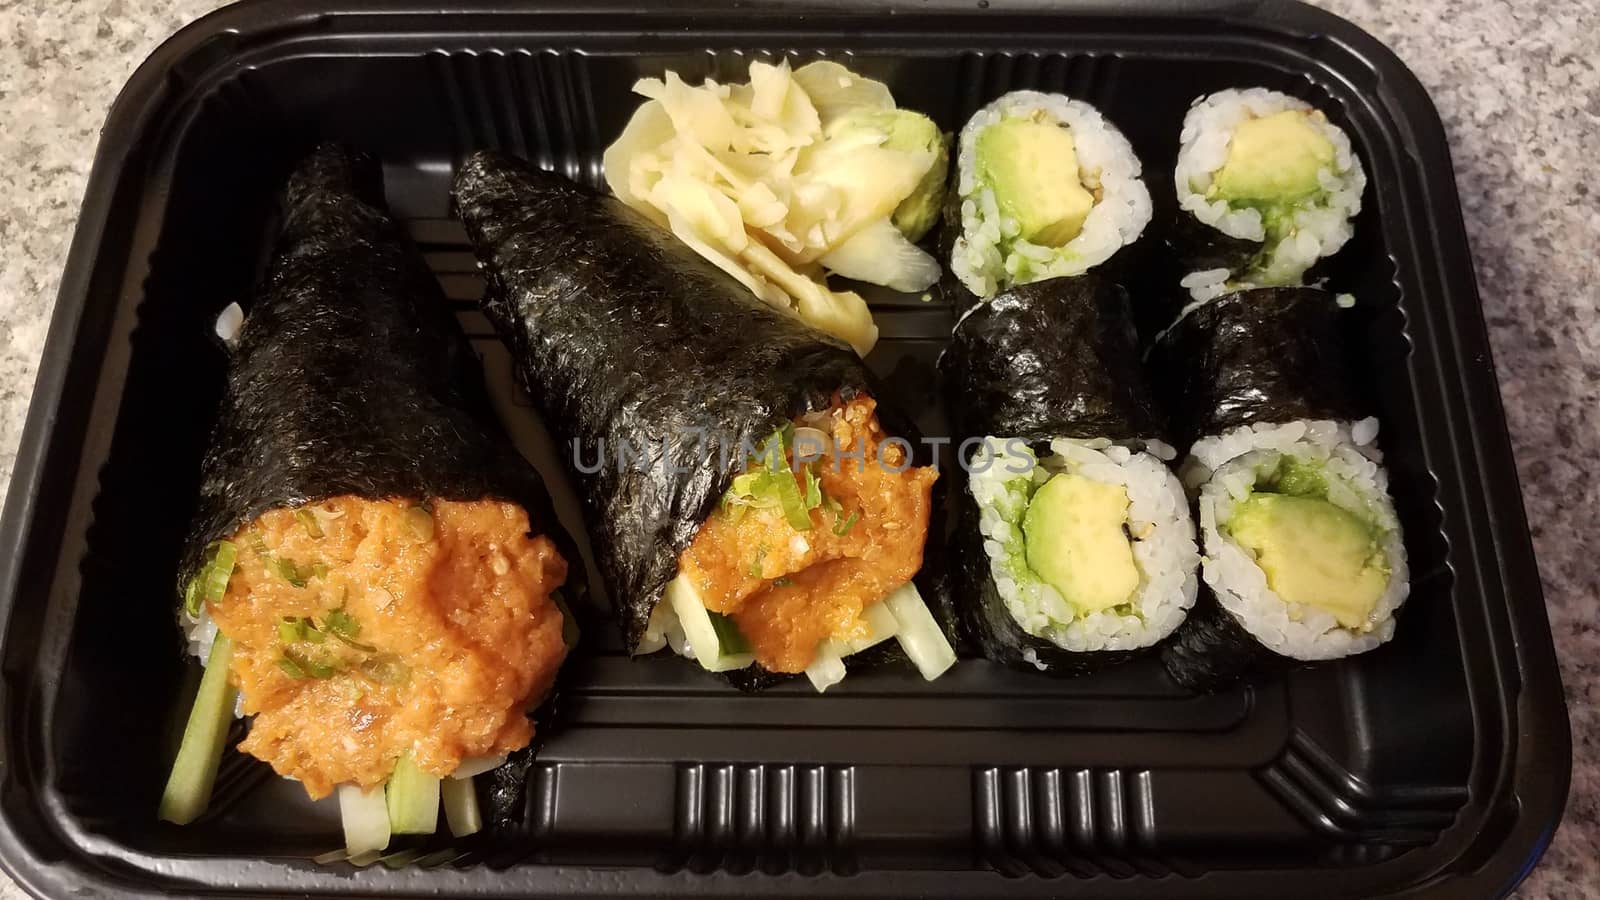 spicy tuna and handroll and avocado sushi in container by stockphotofan1